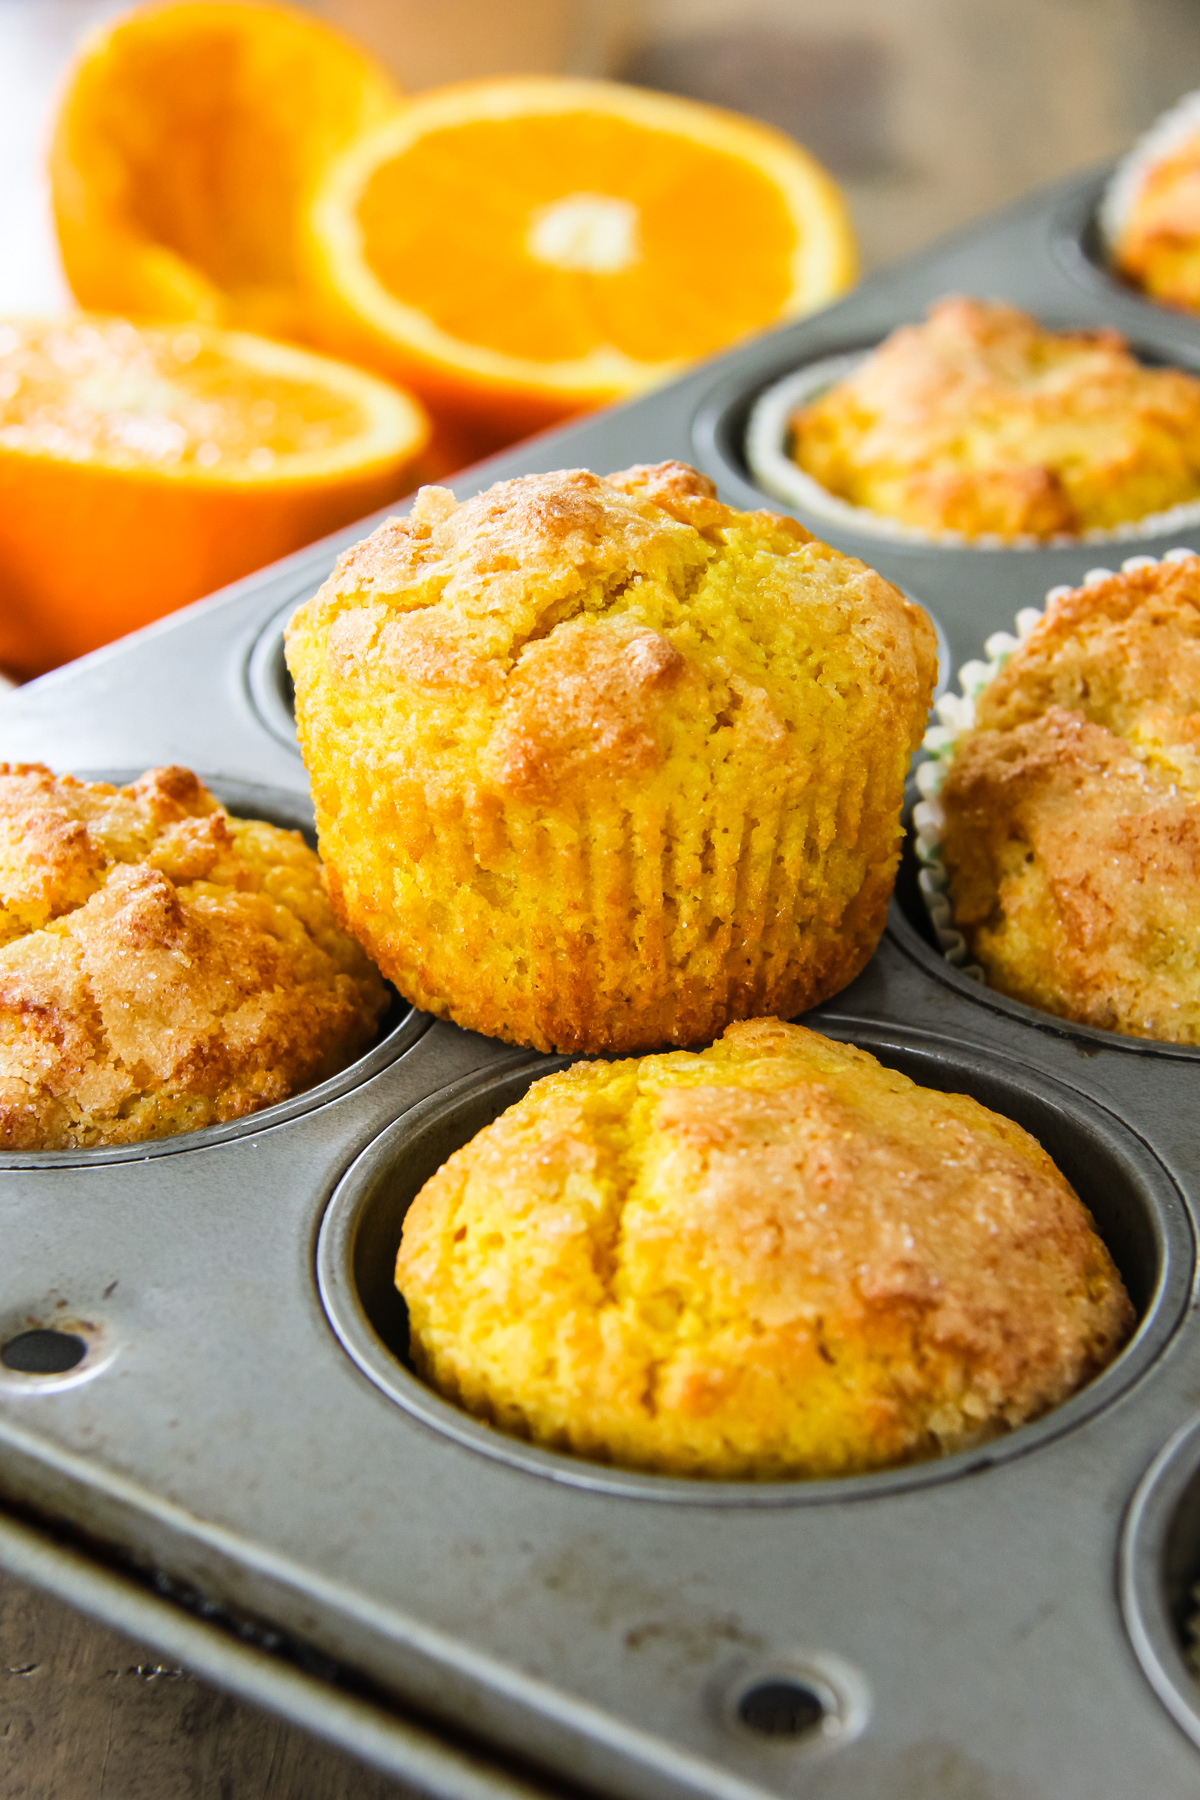 an orange blender muffin sitting on a muffin tray. in the background are two orange halves